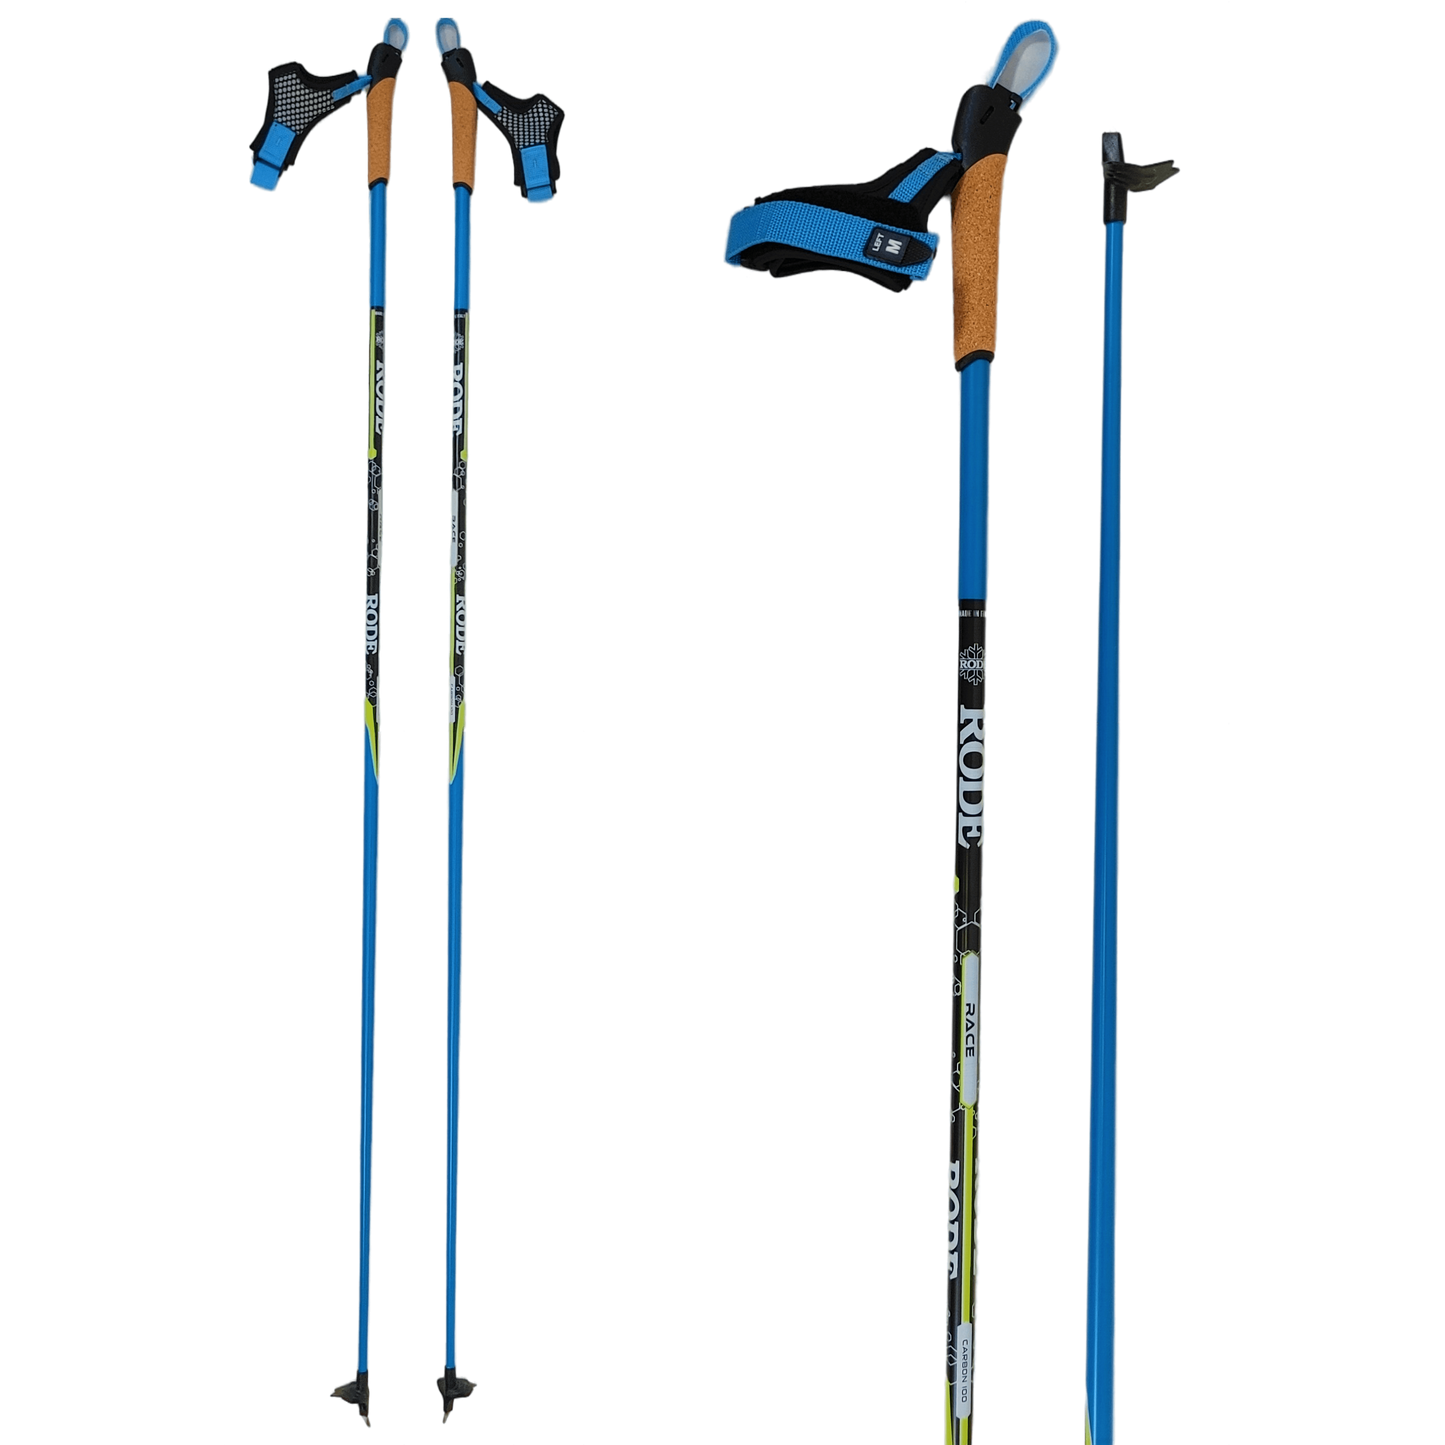 A product picture of the Rode Race Poles